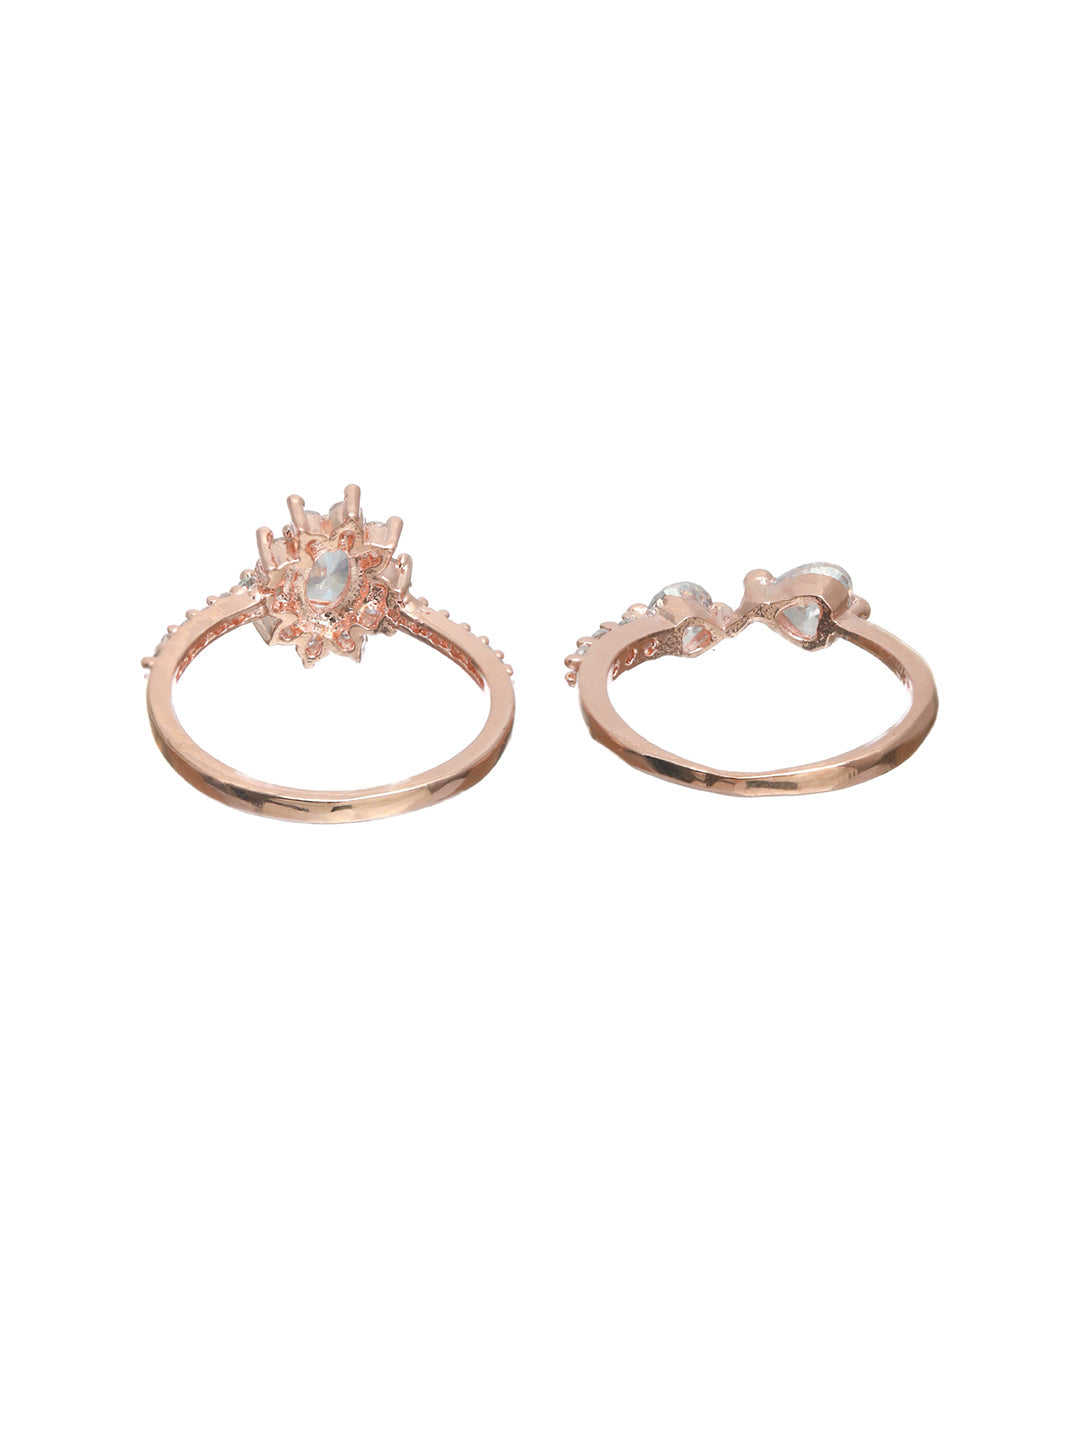 Floral American Diamond Rose Gold Plated Ring Set of 2 - NOZ2TOZ